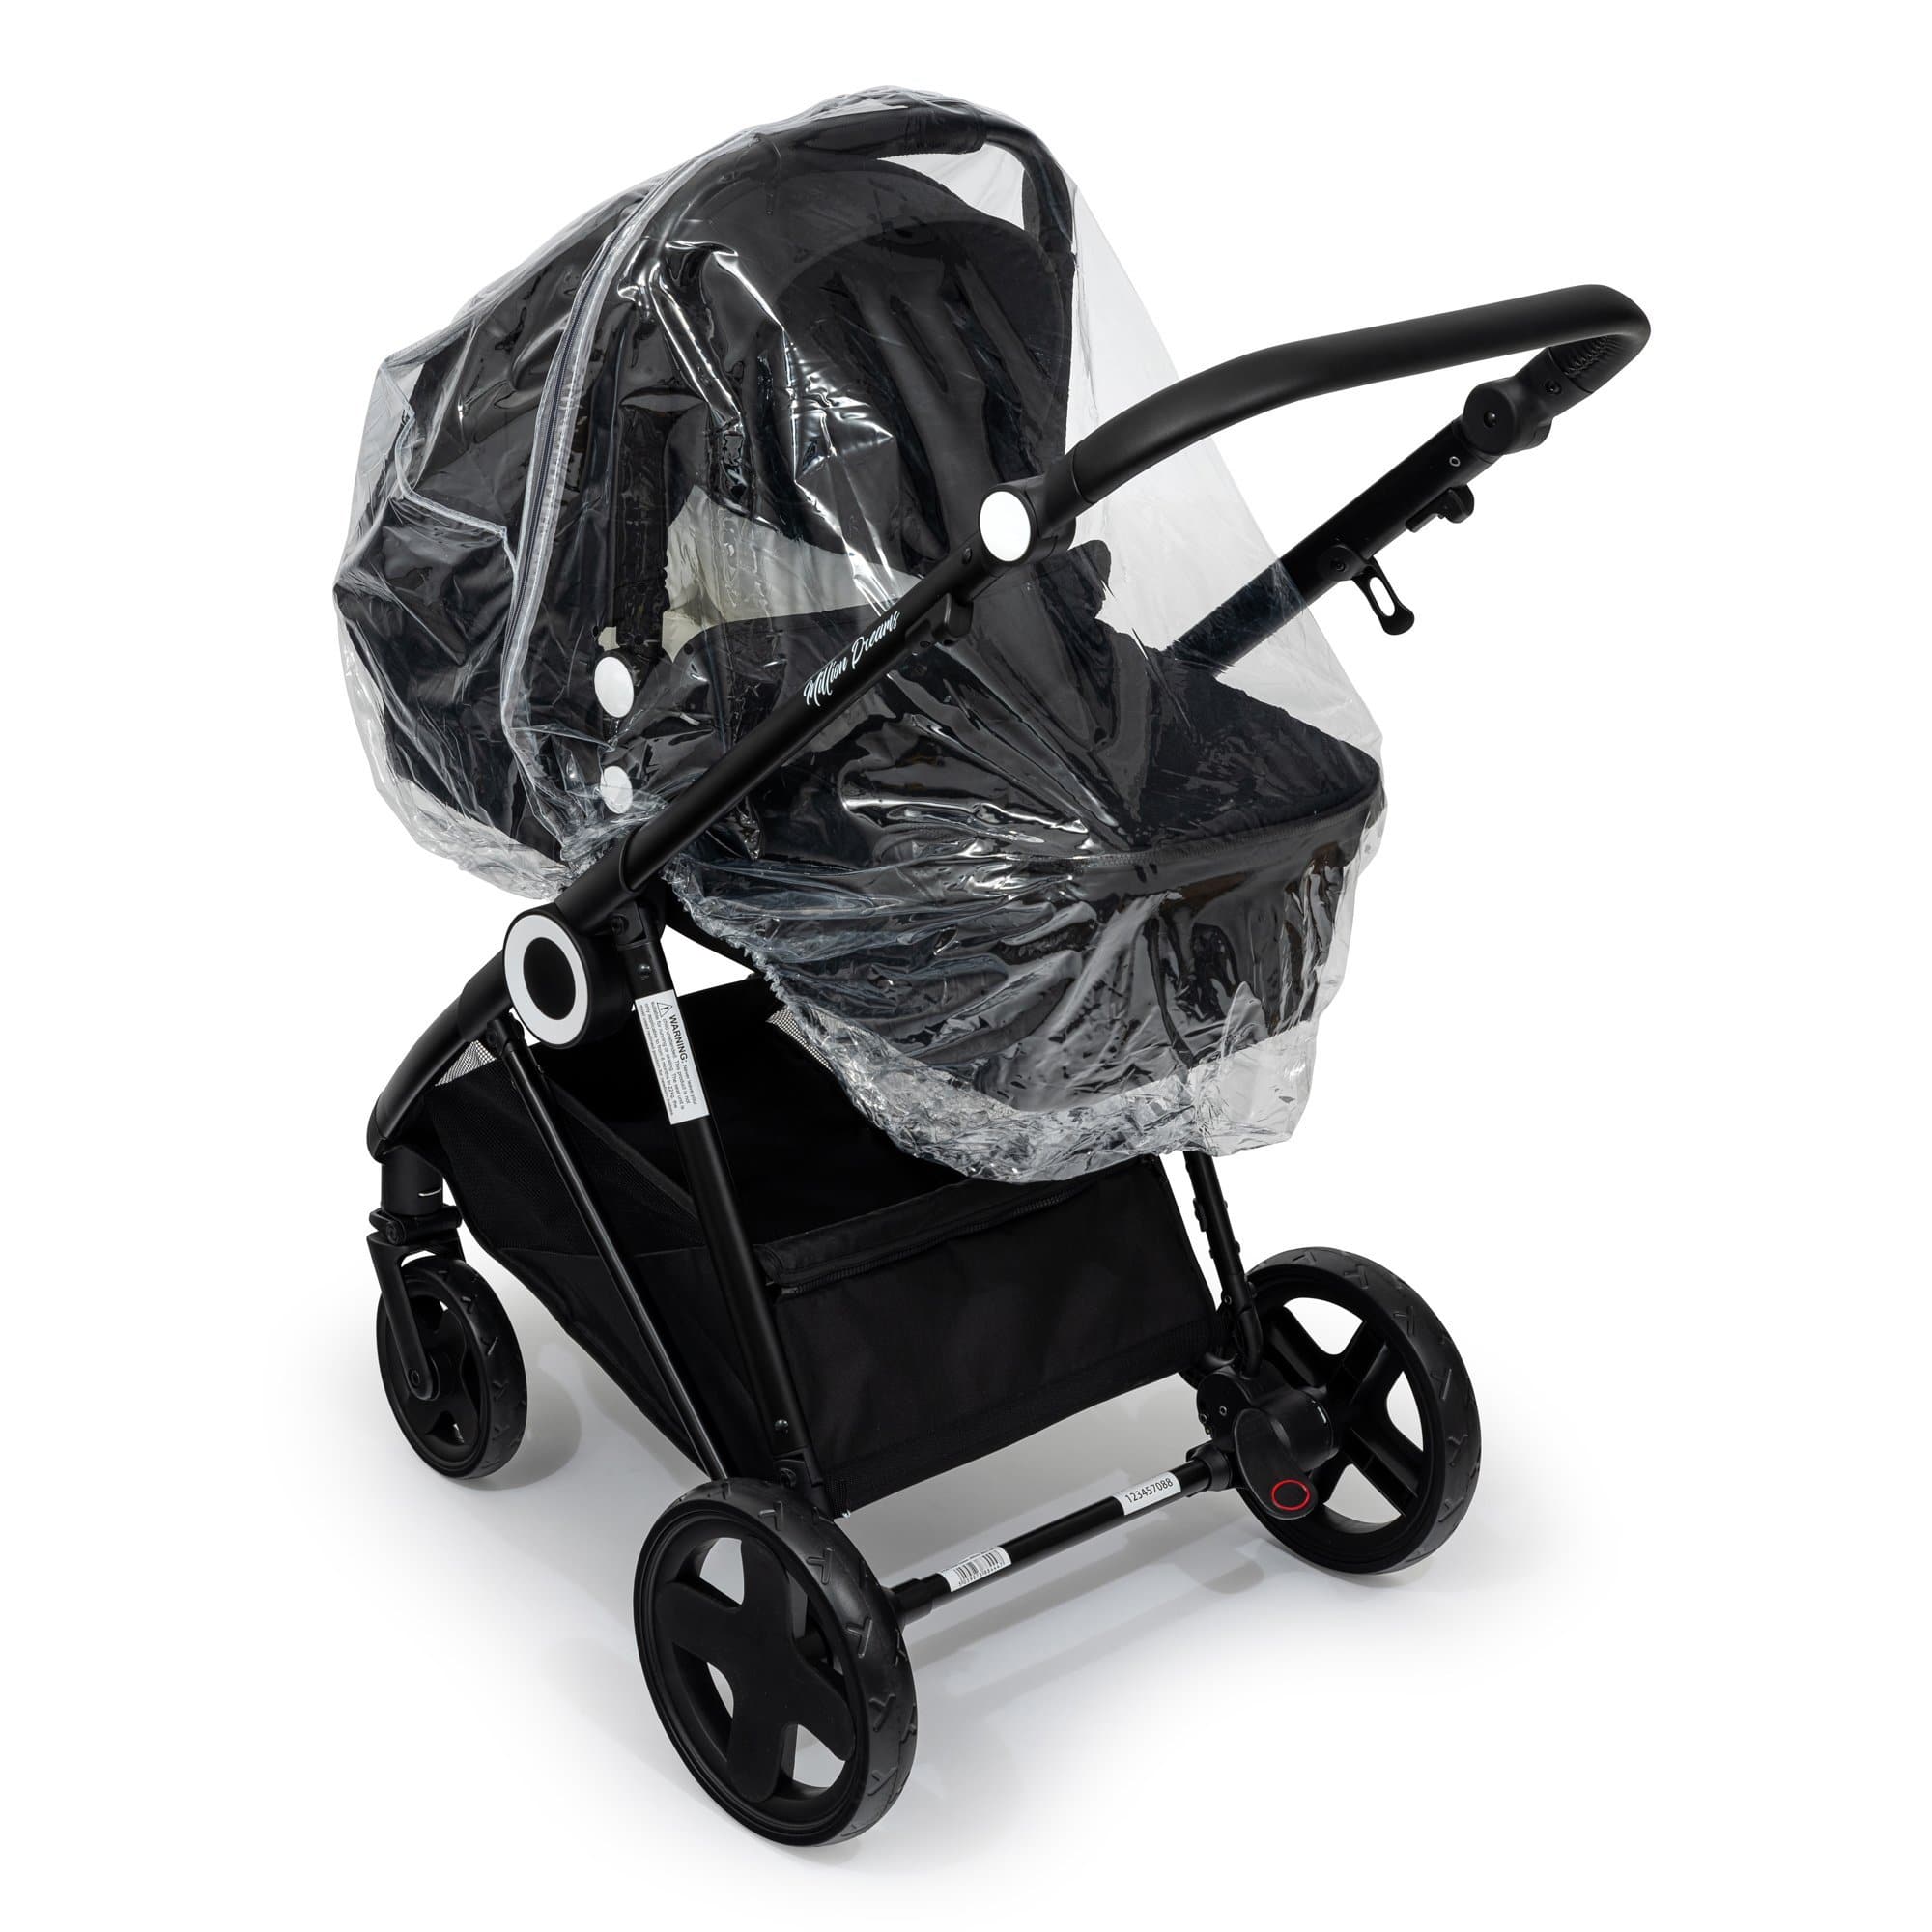 2 in 1 Rain Cover Compatible with Uppababy - Fits All Models   